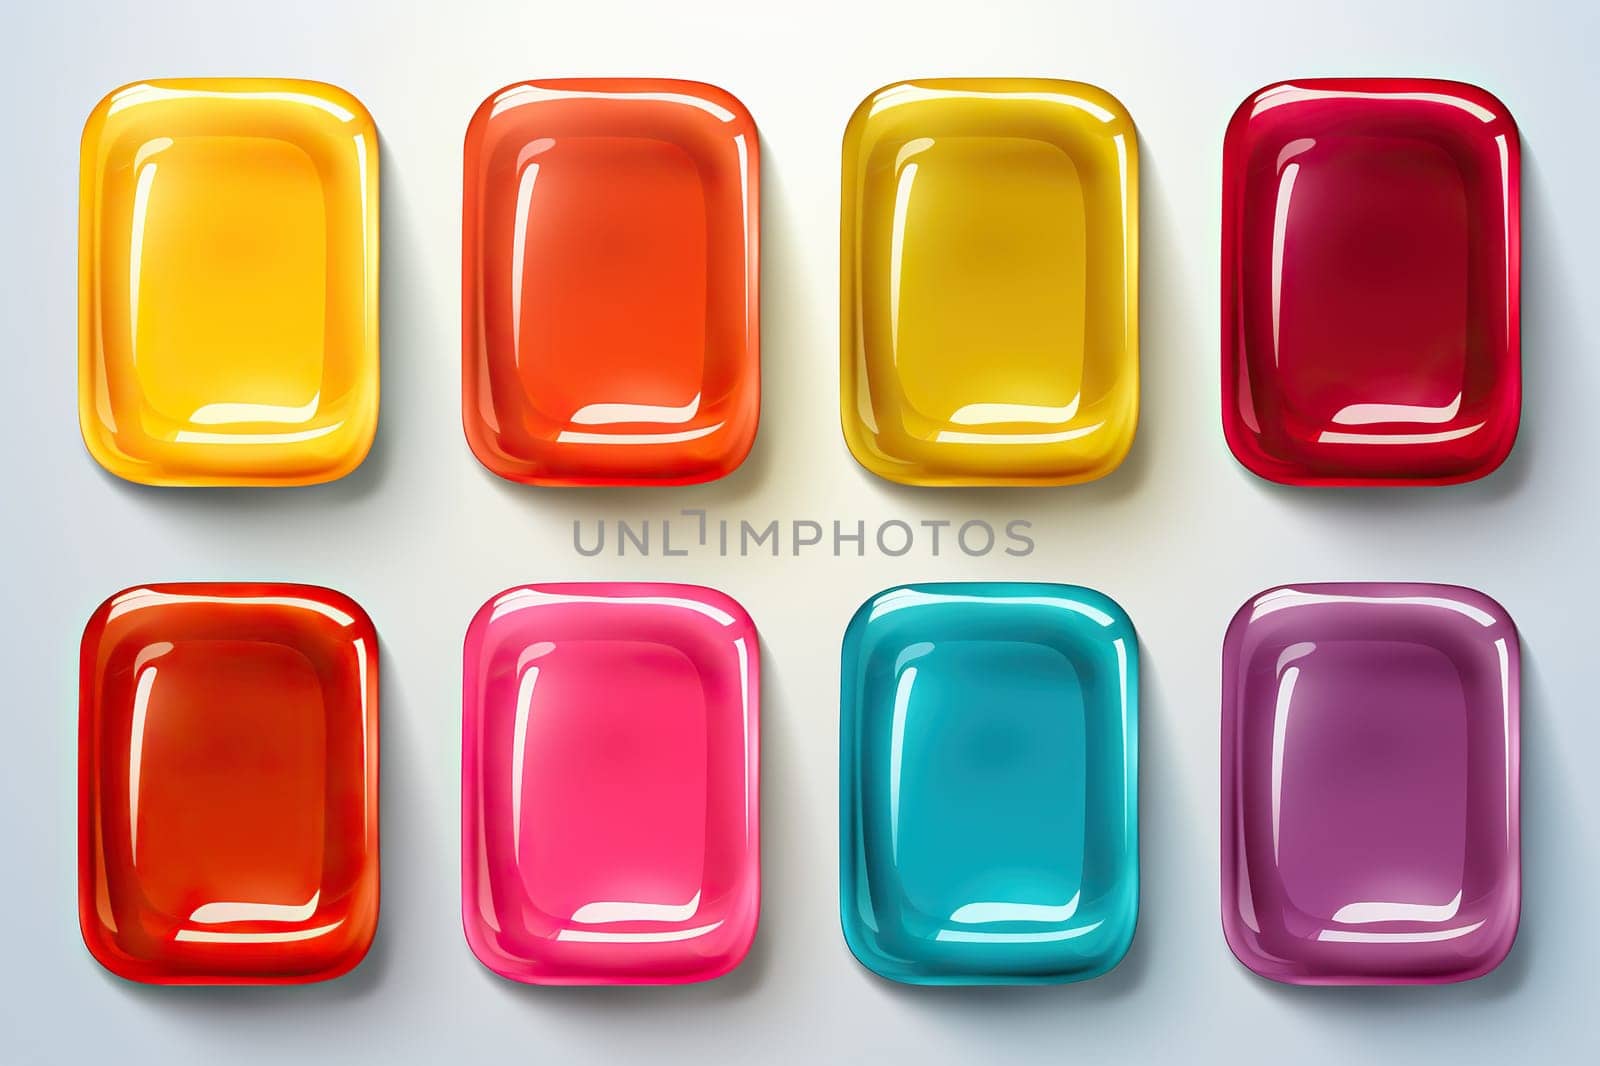 Set of glossy rectangular buttons, icons of different colors on a white background.